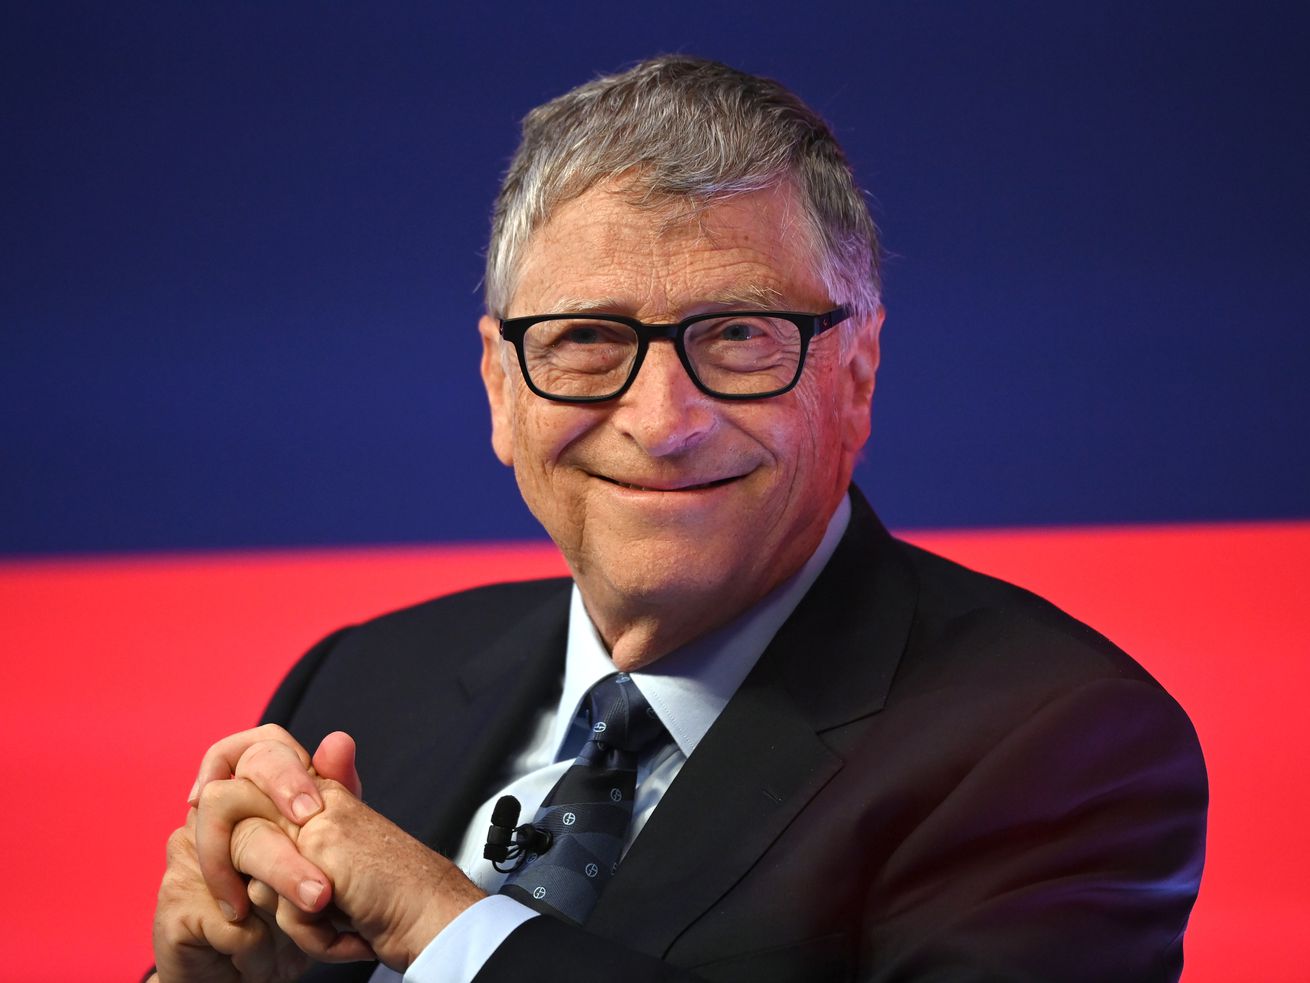 Bill Gates knows philanthropy alone can’t solve inequality